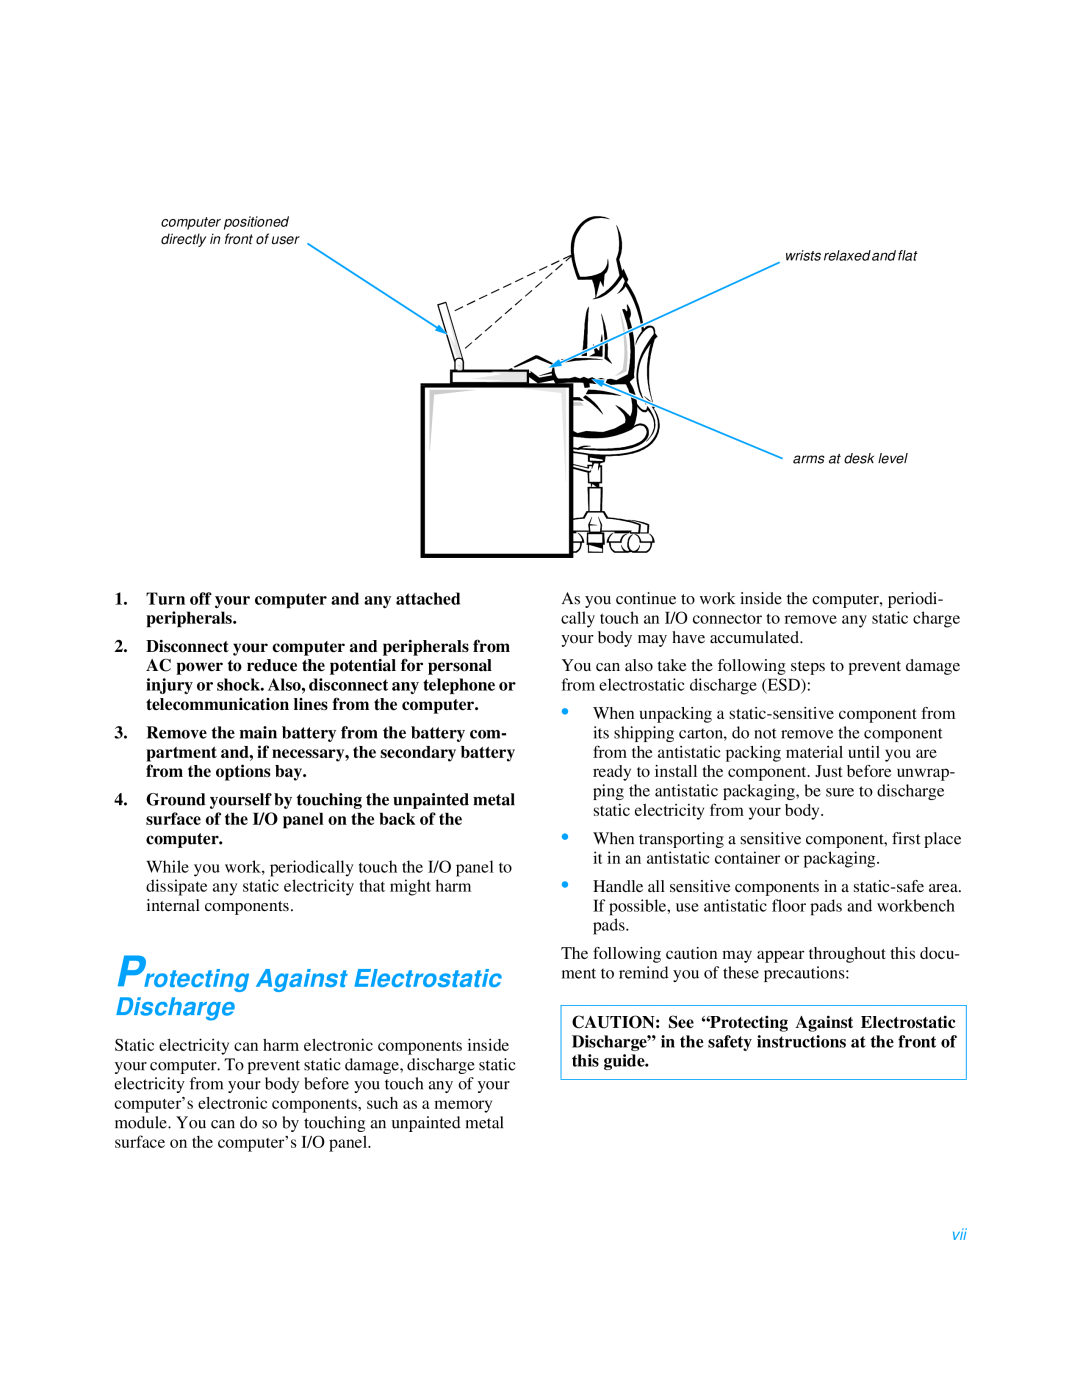 Dell 3000 manual Protecting Against Electrostatic Discharge 